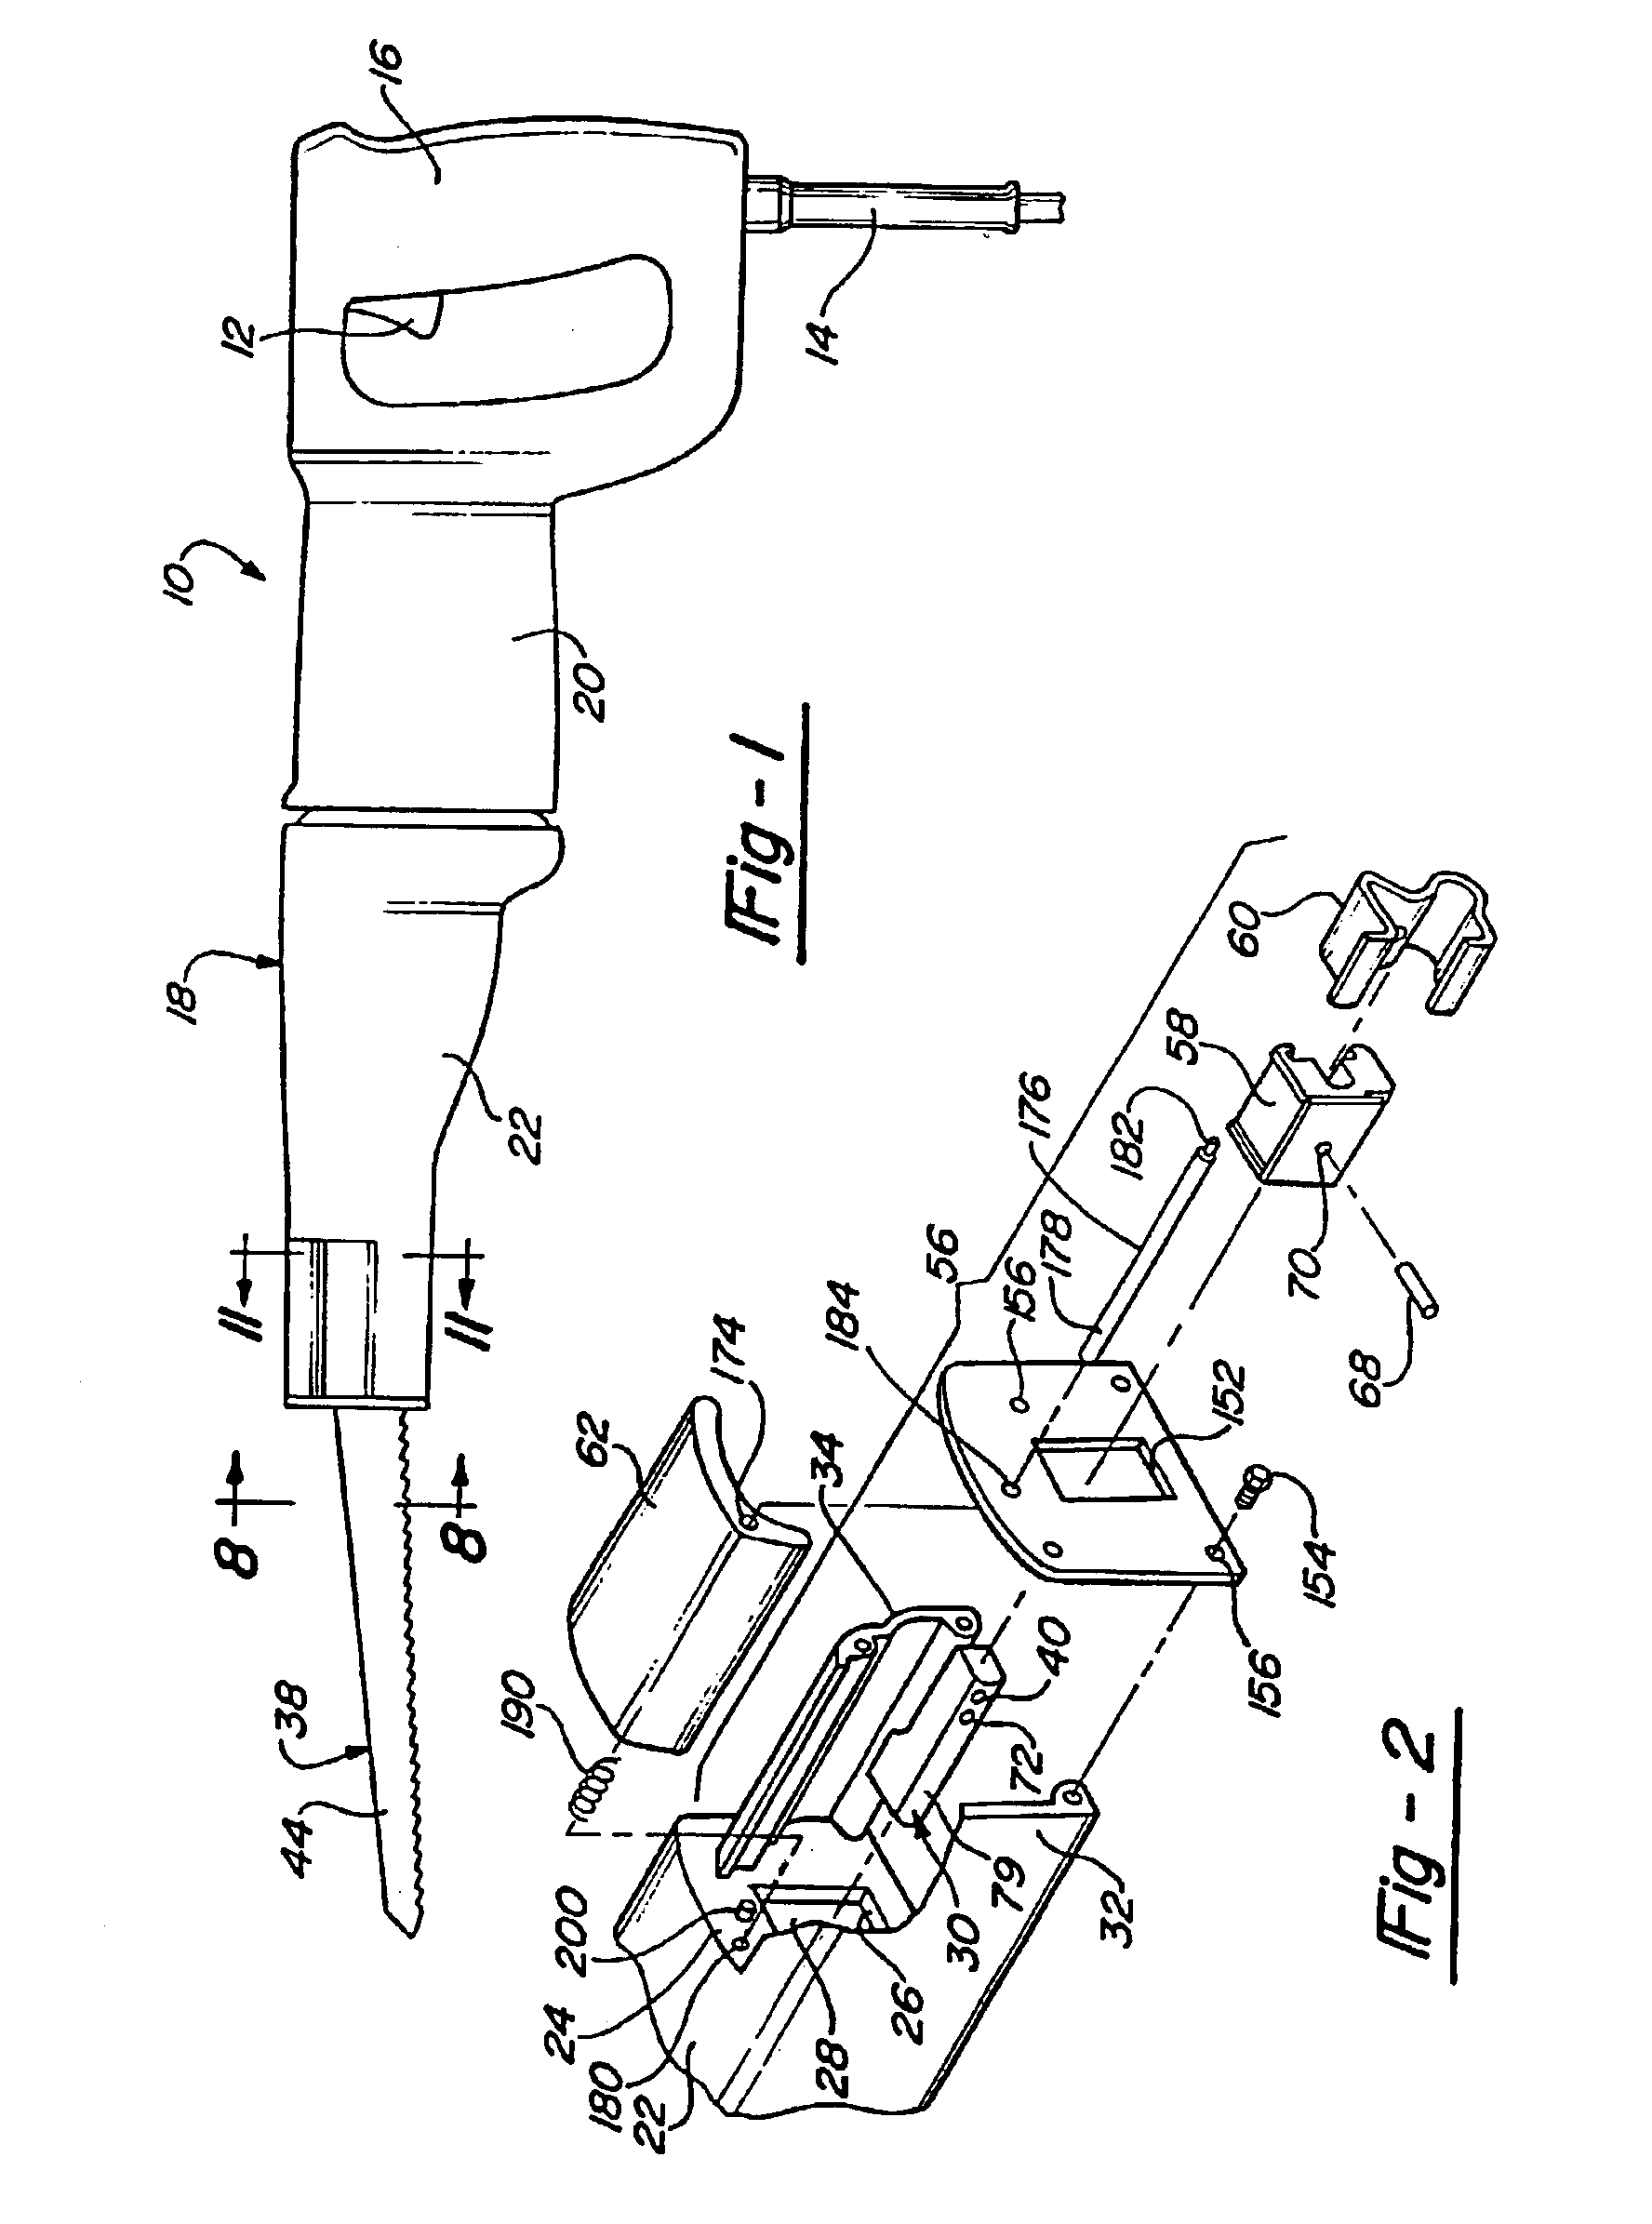 Clamping arrangement for receiving a saw blade